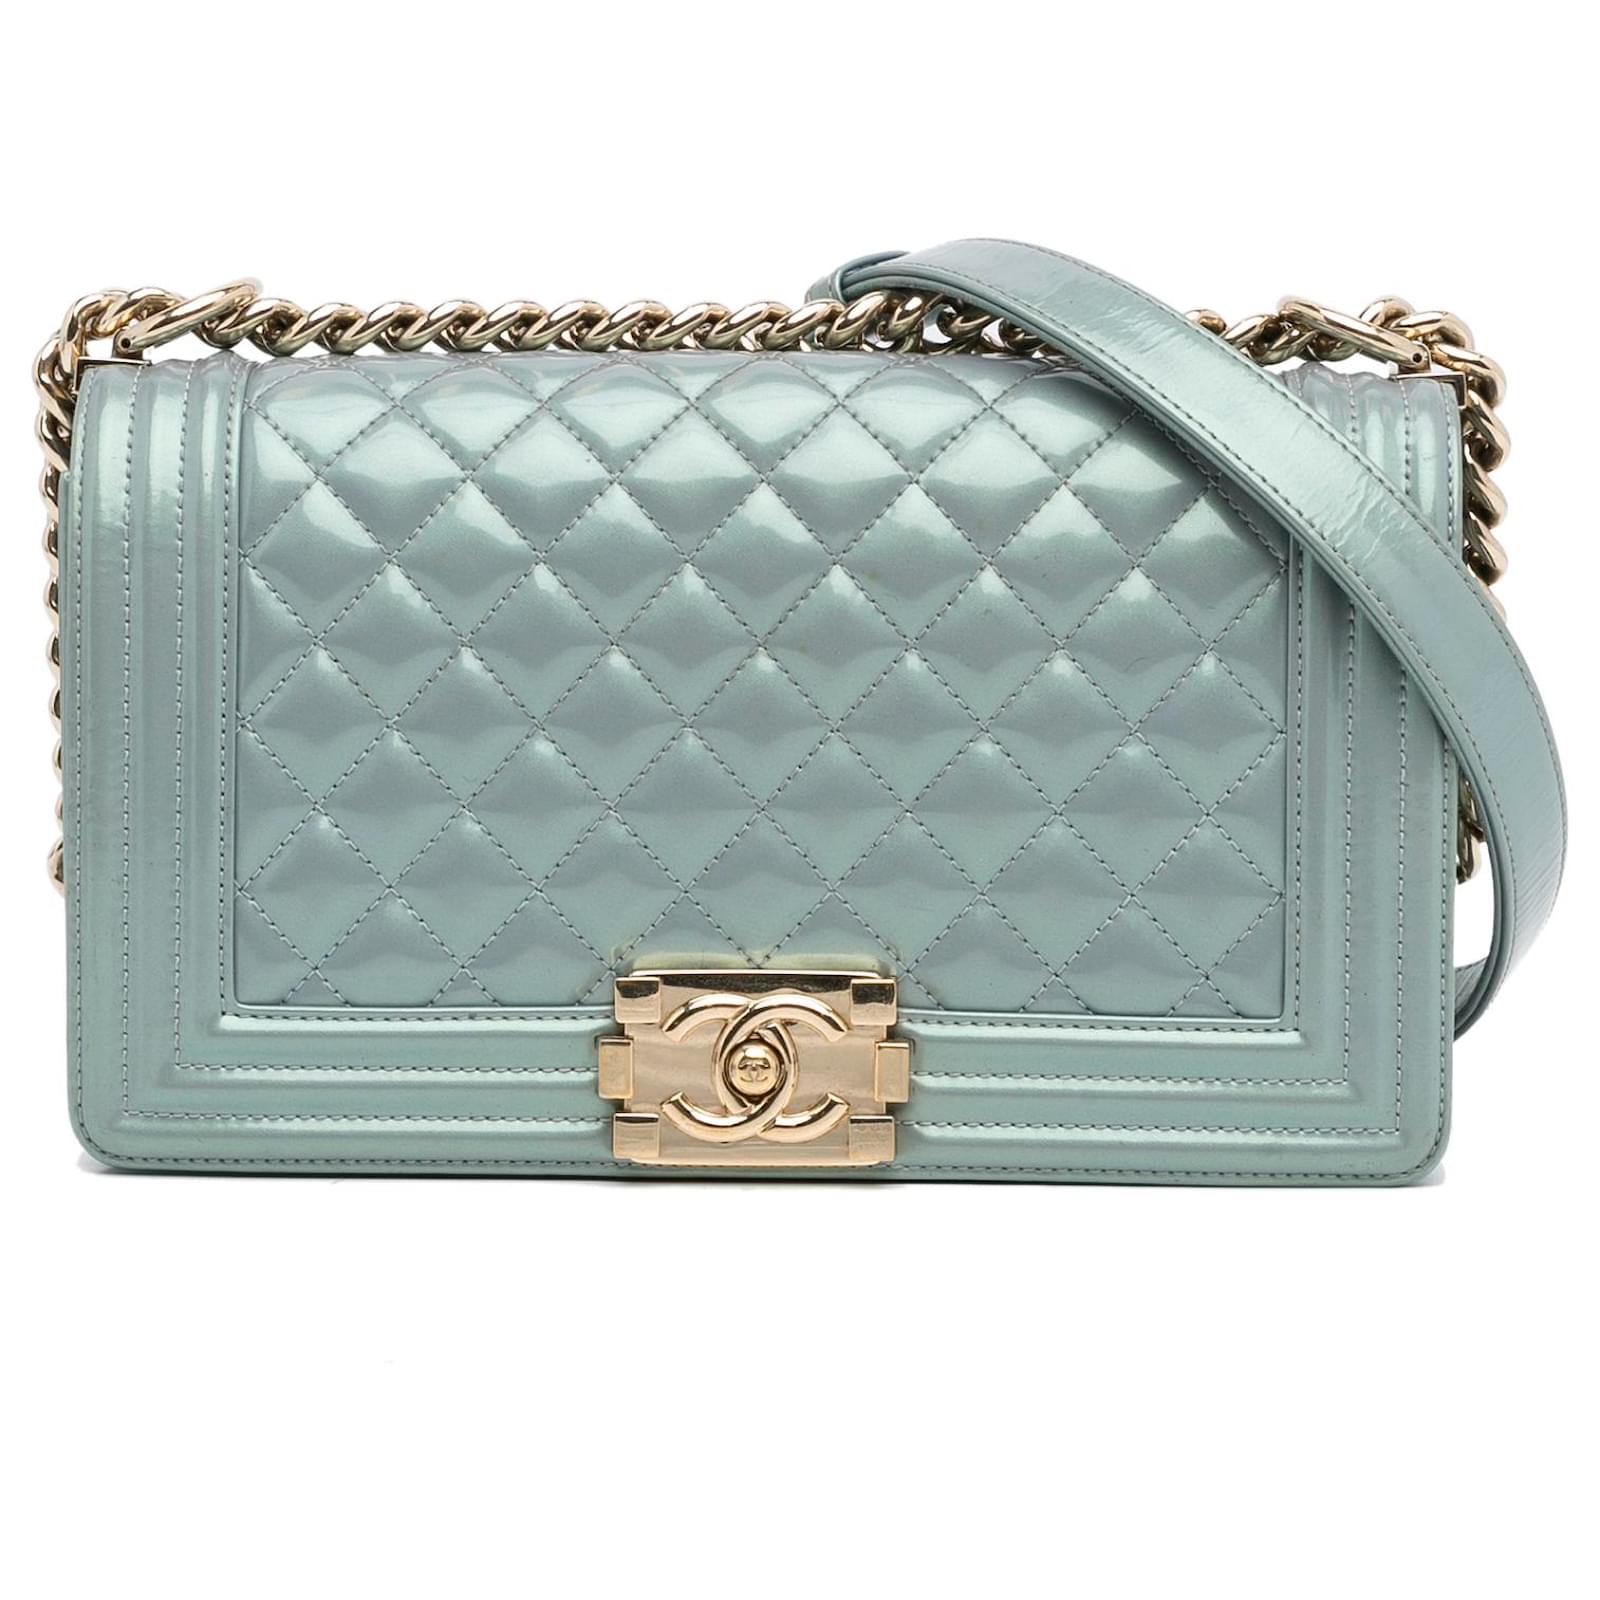 Chanel Tricolor Jersey Rope Flap Large Bag – The Closet